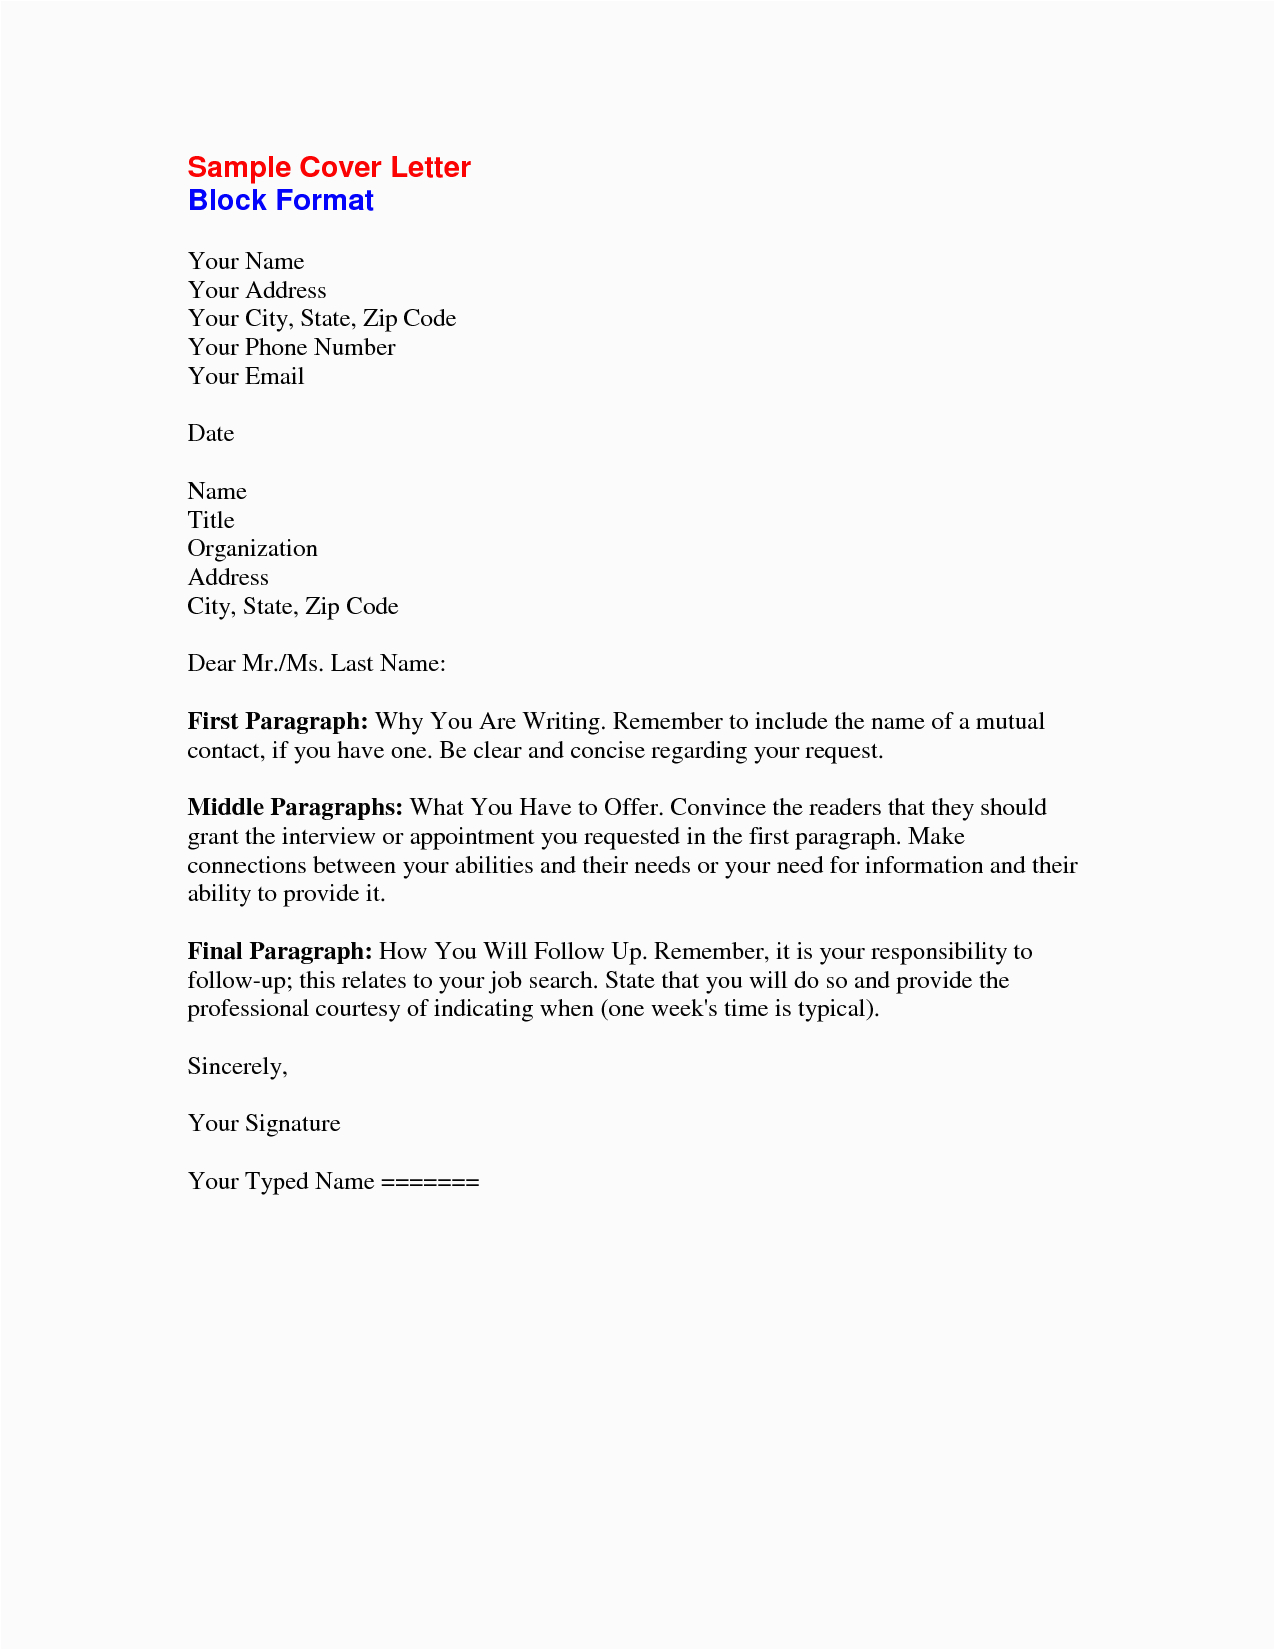 Sample Resume Cover Letter Unknown Recipient Cover Letter Unknown Recipient Sample How to Address A Cover Letter